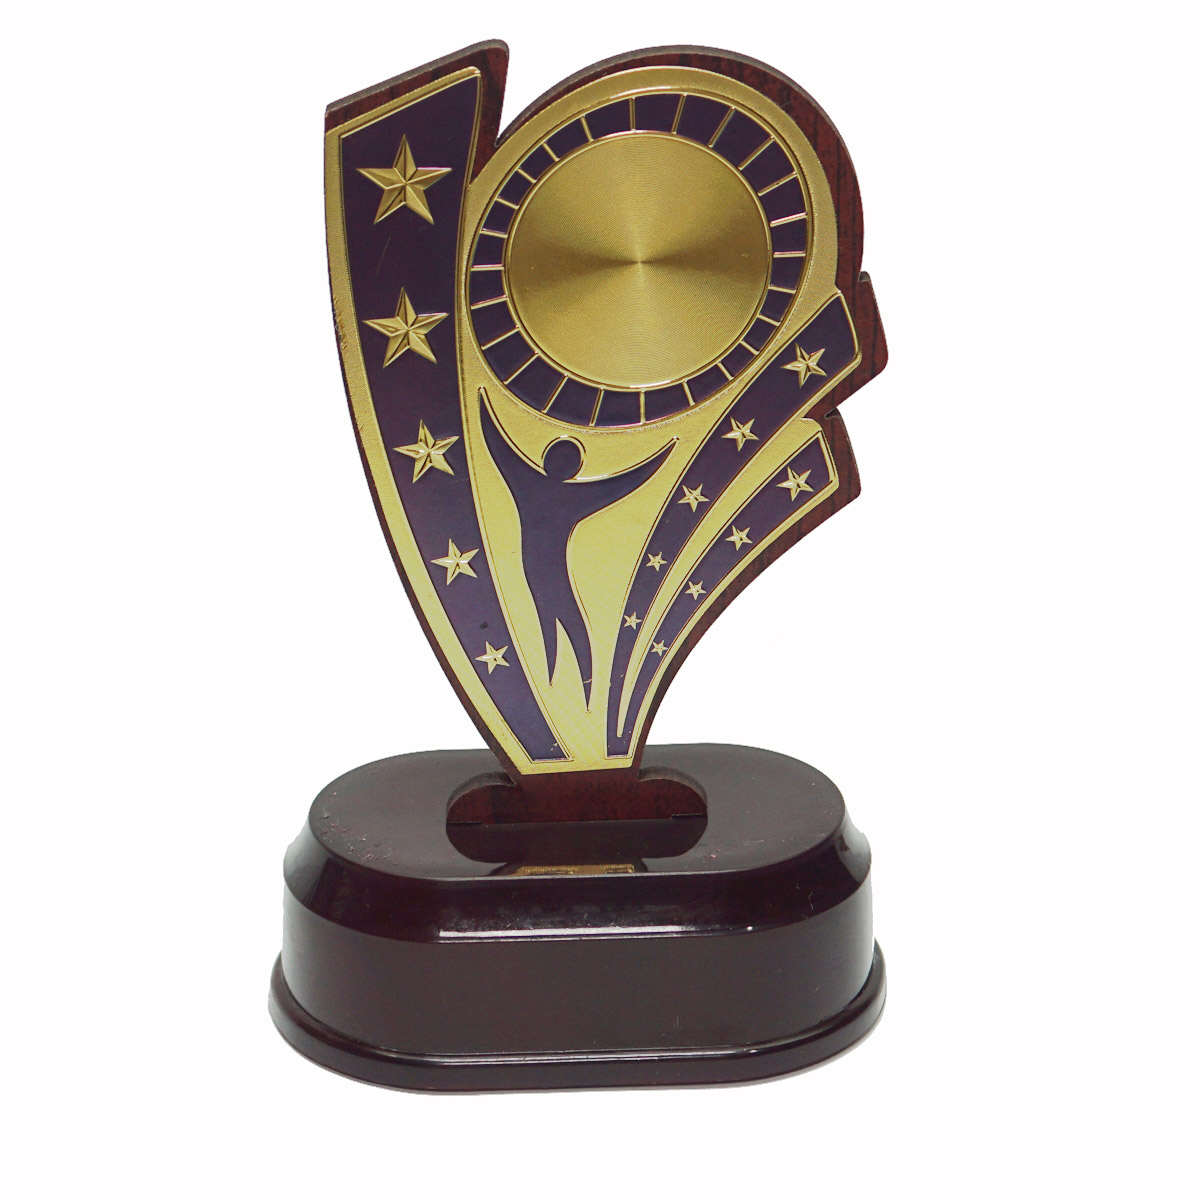 penhouse.in TP4501 Wooden Trophy 6.5 Inch With Customization SKU TP012